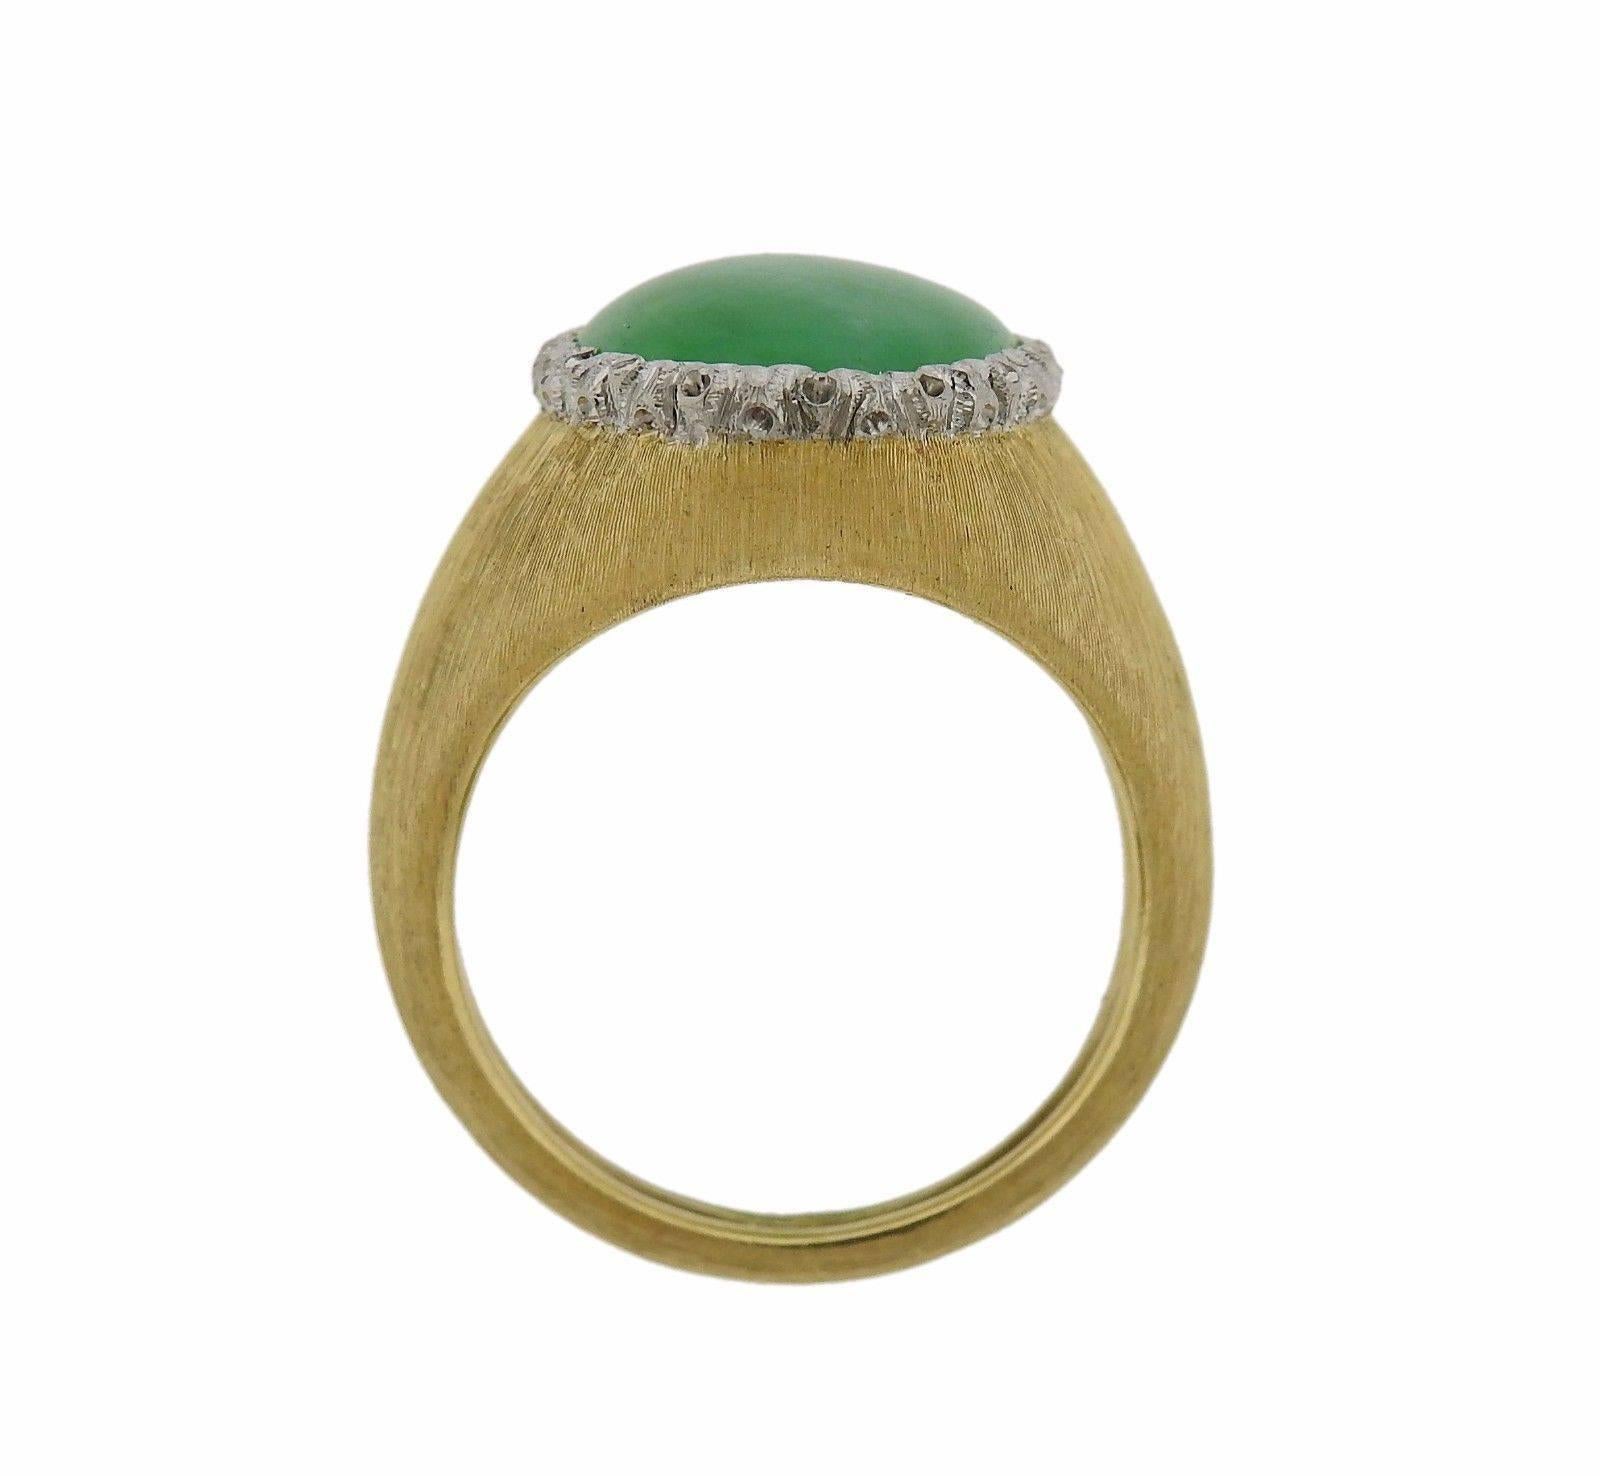 An 18k yellow gold ring set with Jade (16mm x 11.8mm).  The ring is a size 6 1/2 and the top is 17mm wide. The weight of the piece is 8.6 grams. Marked: Buccellati, 750.